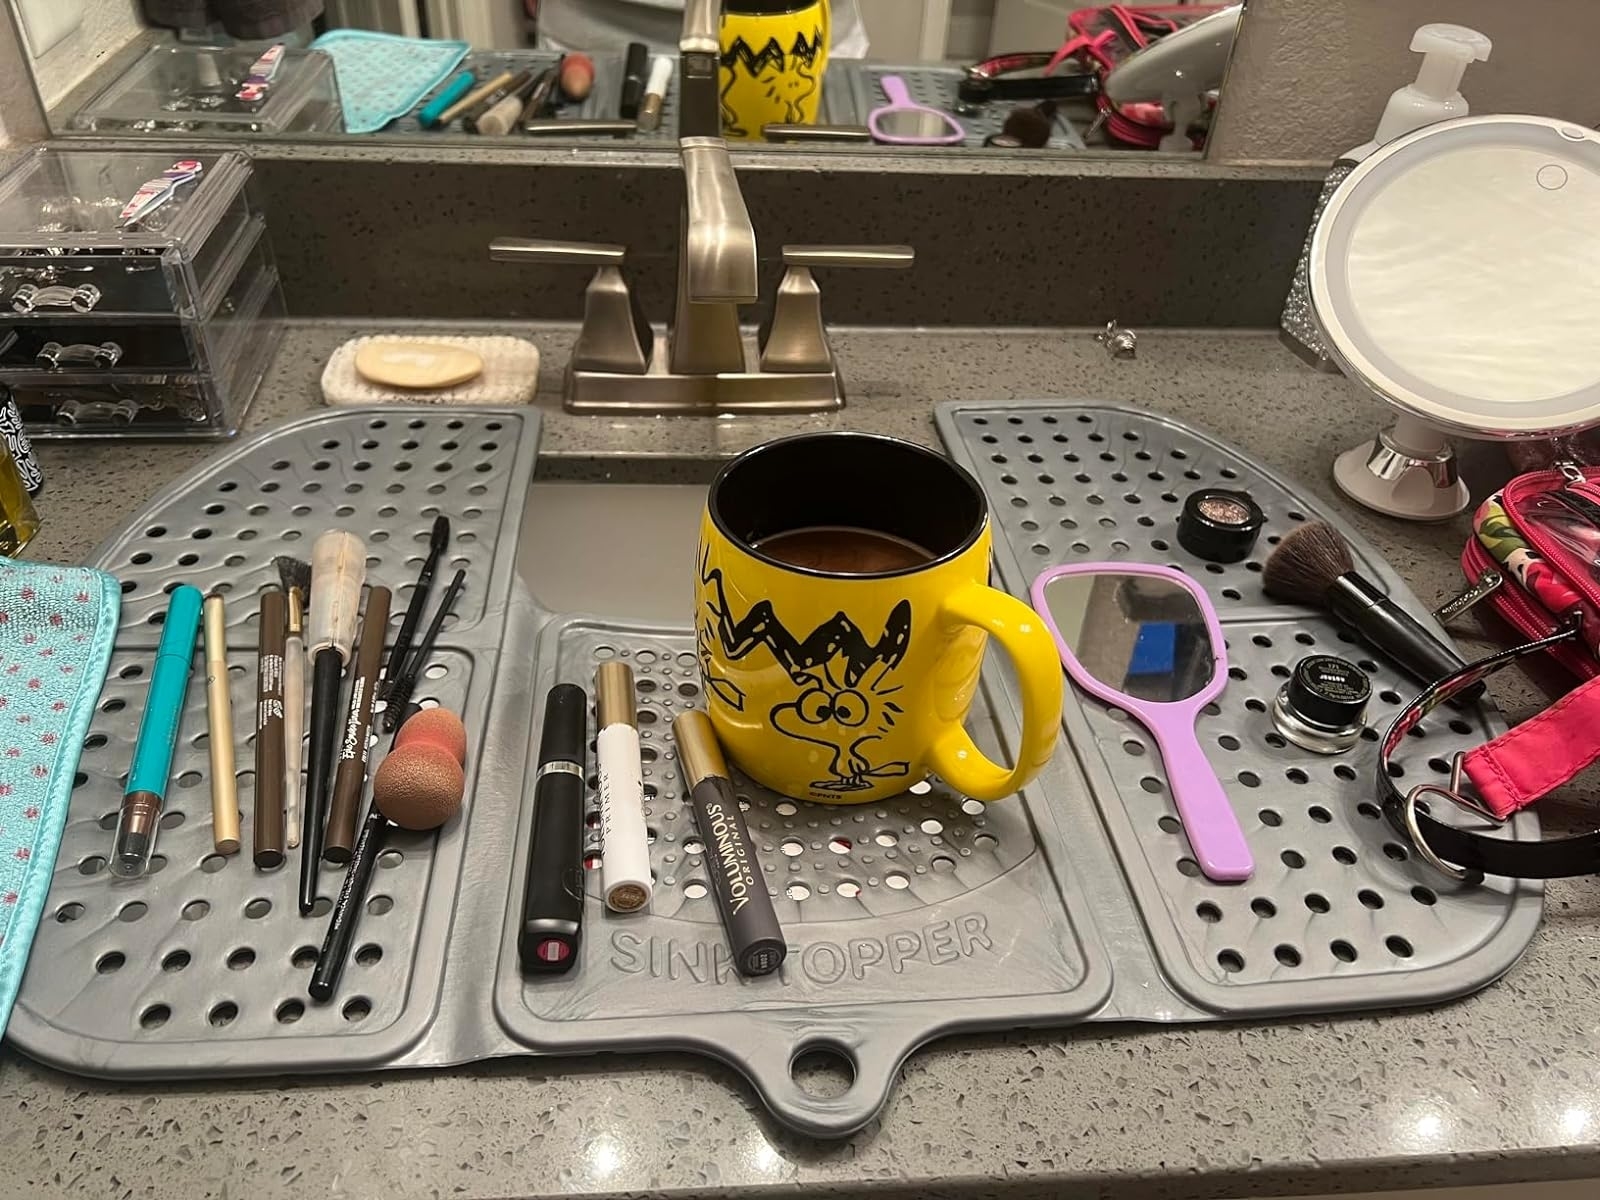 A bathroom counter with various makeup items and a mug featuring a cartoon character, surrounded by beauty accessories